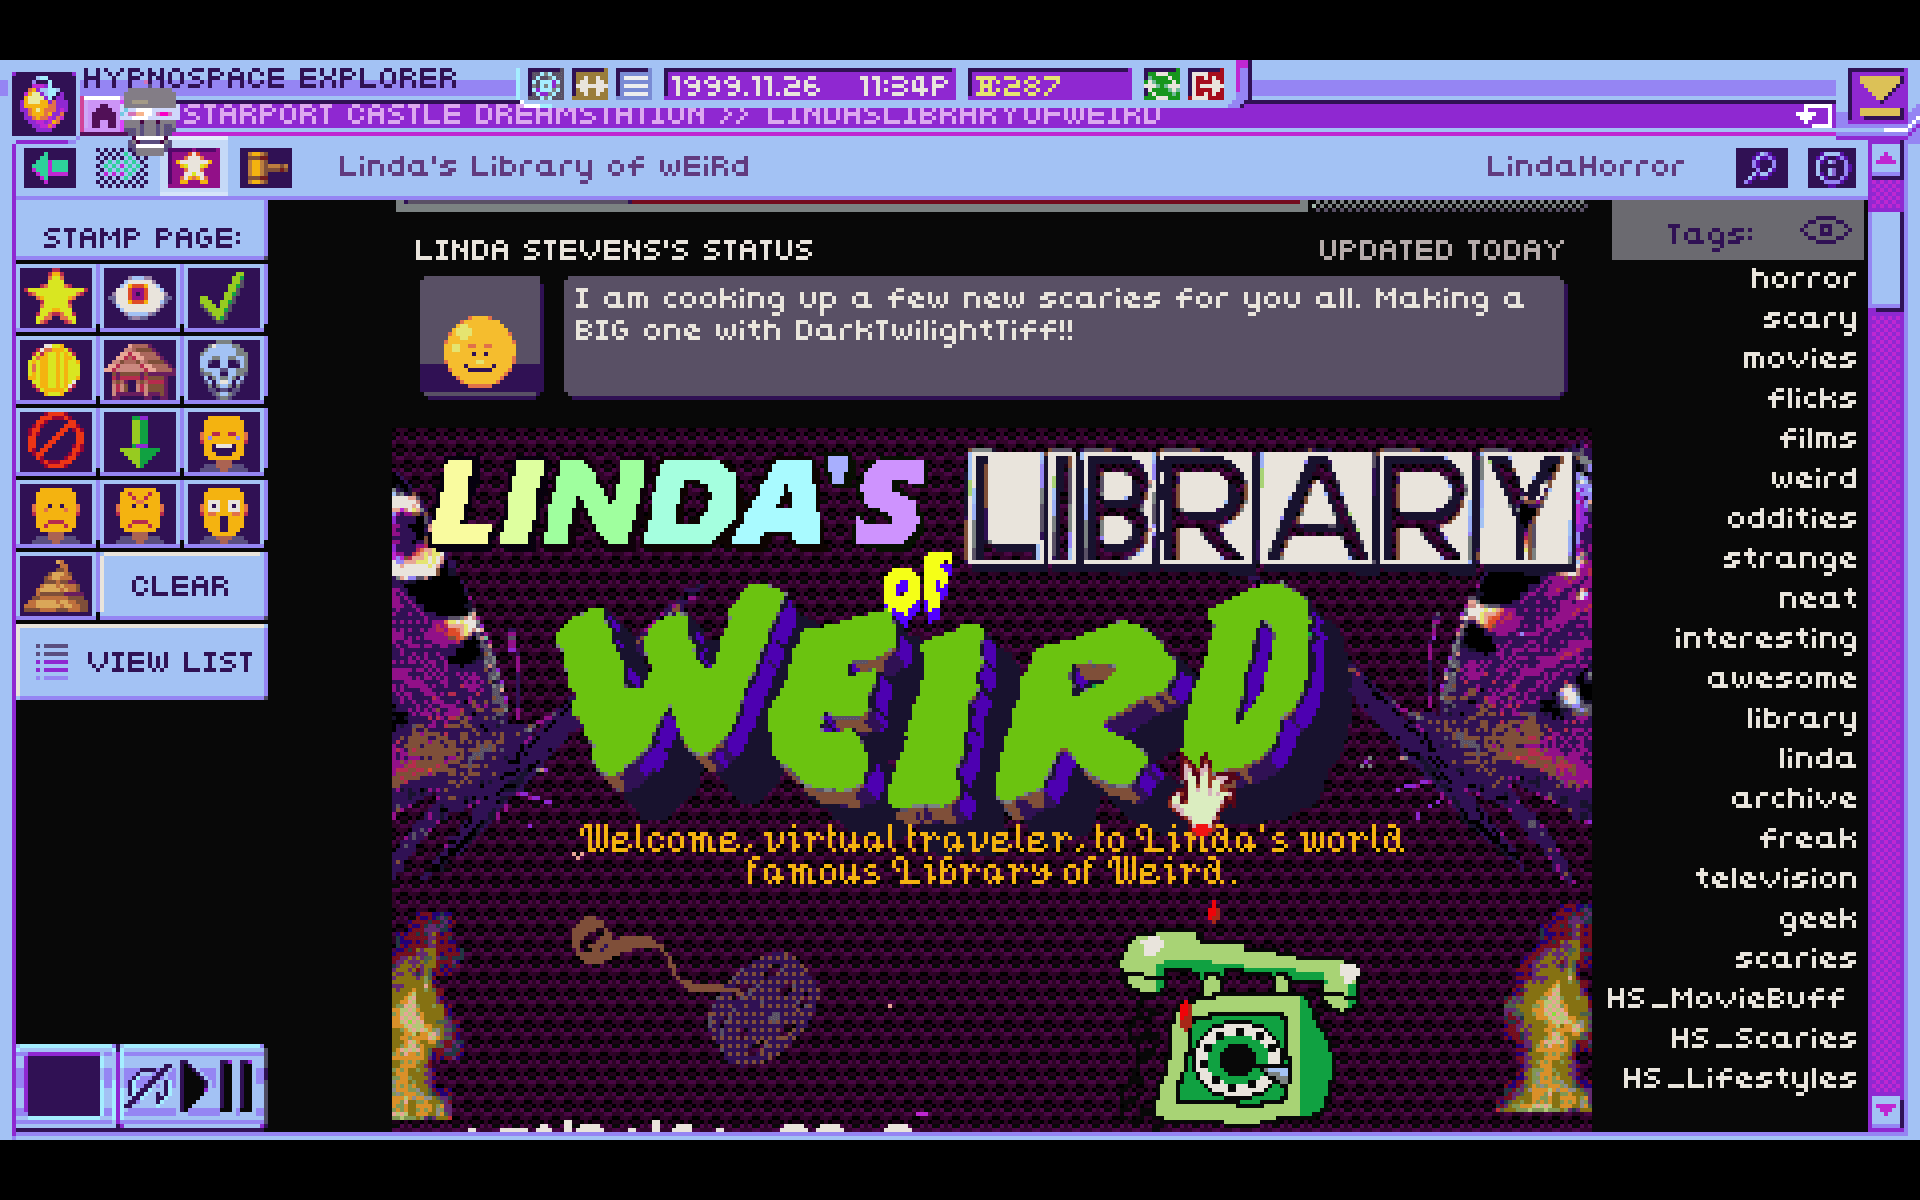 A screenshot from the video game Hypnospace Outlaw, with a website called 'Linda's Library of Weird'.